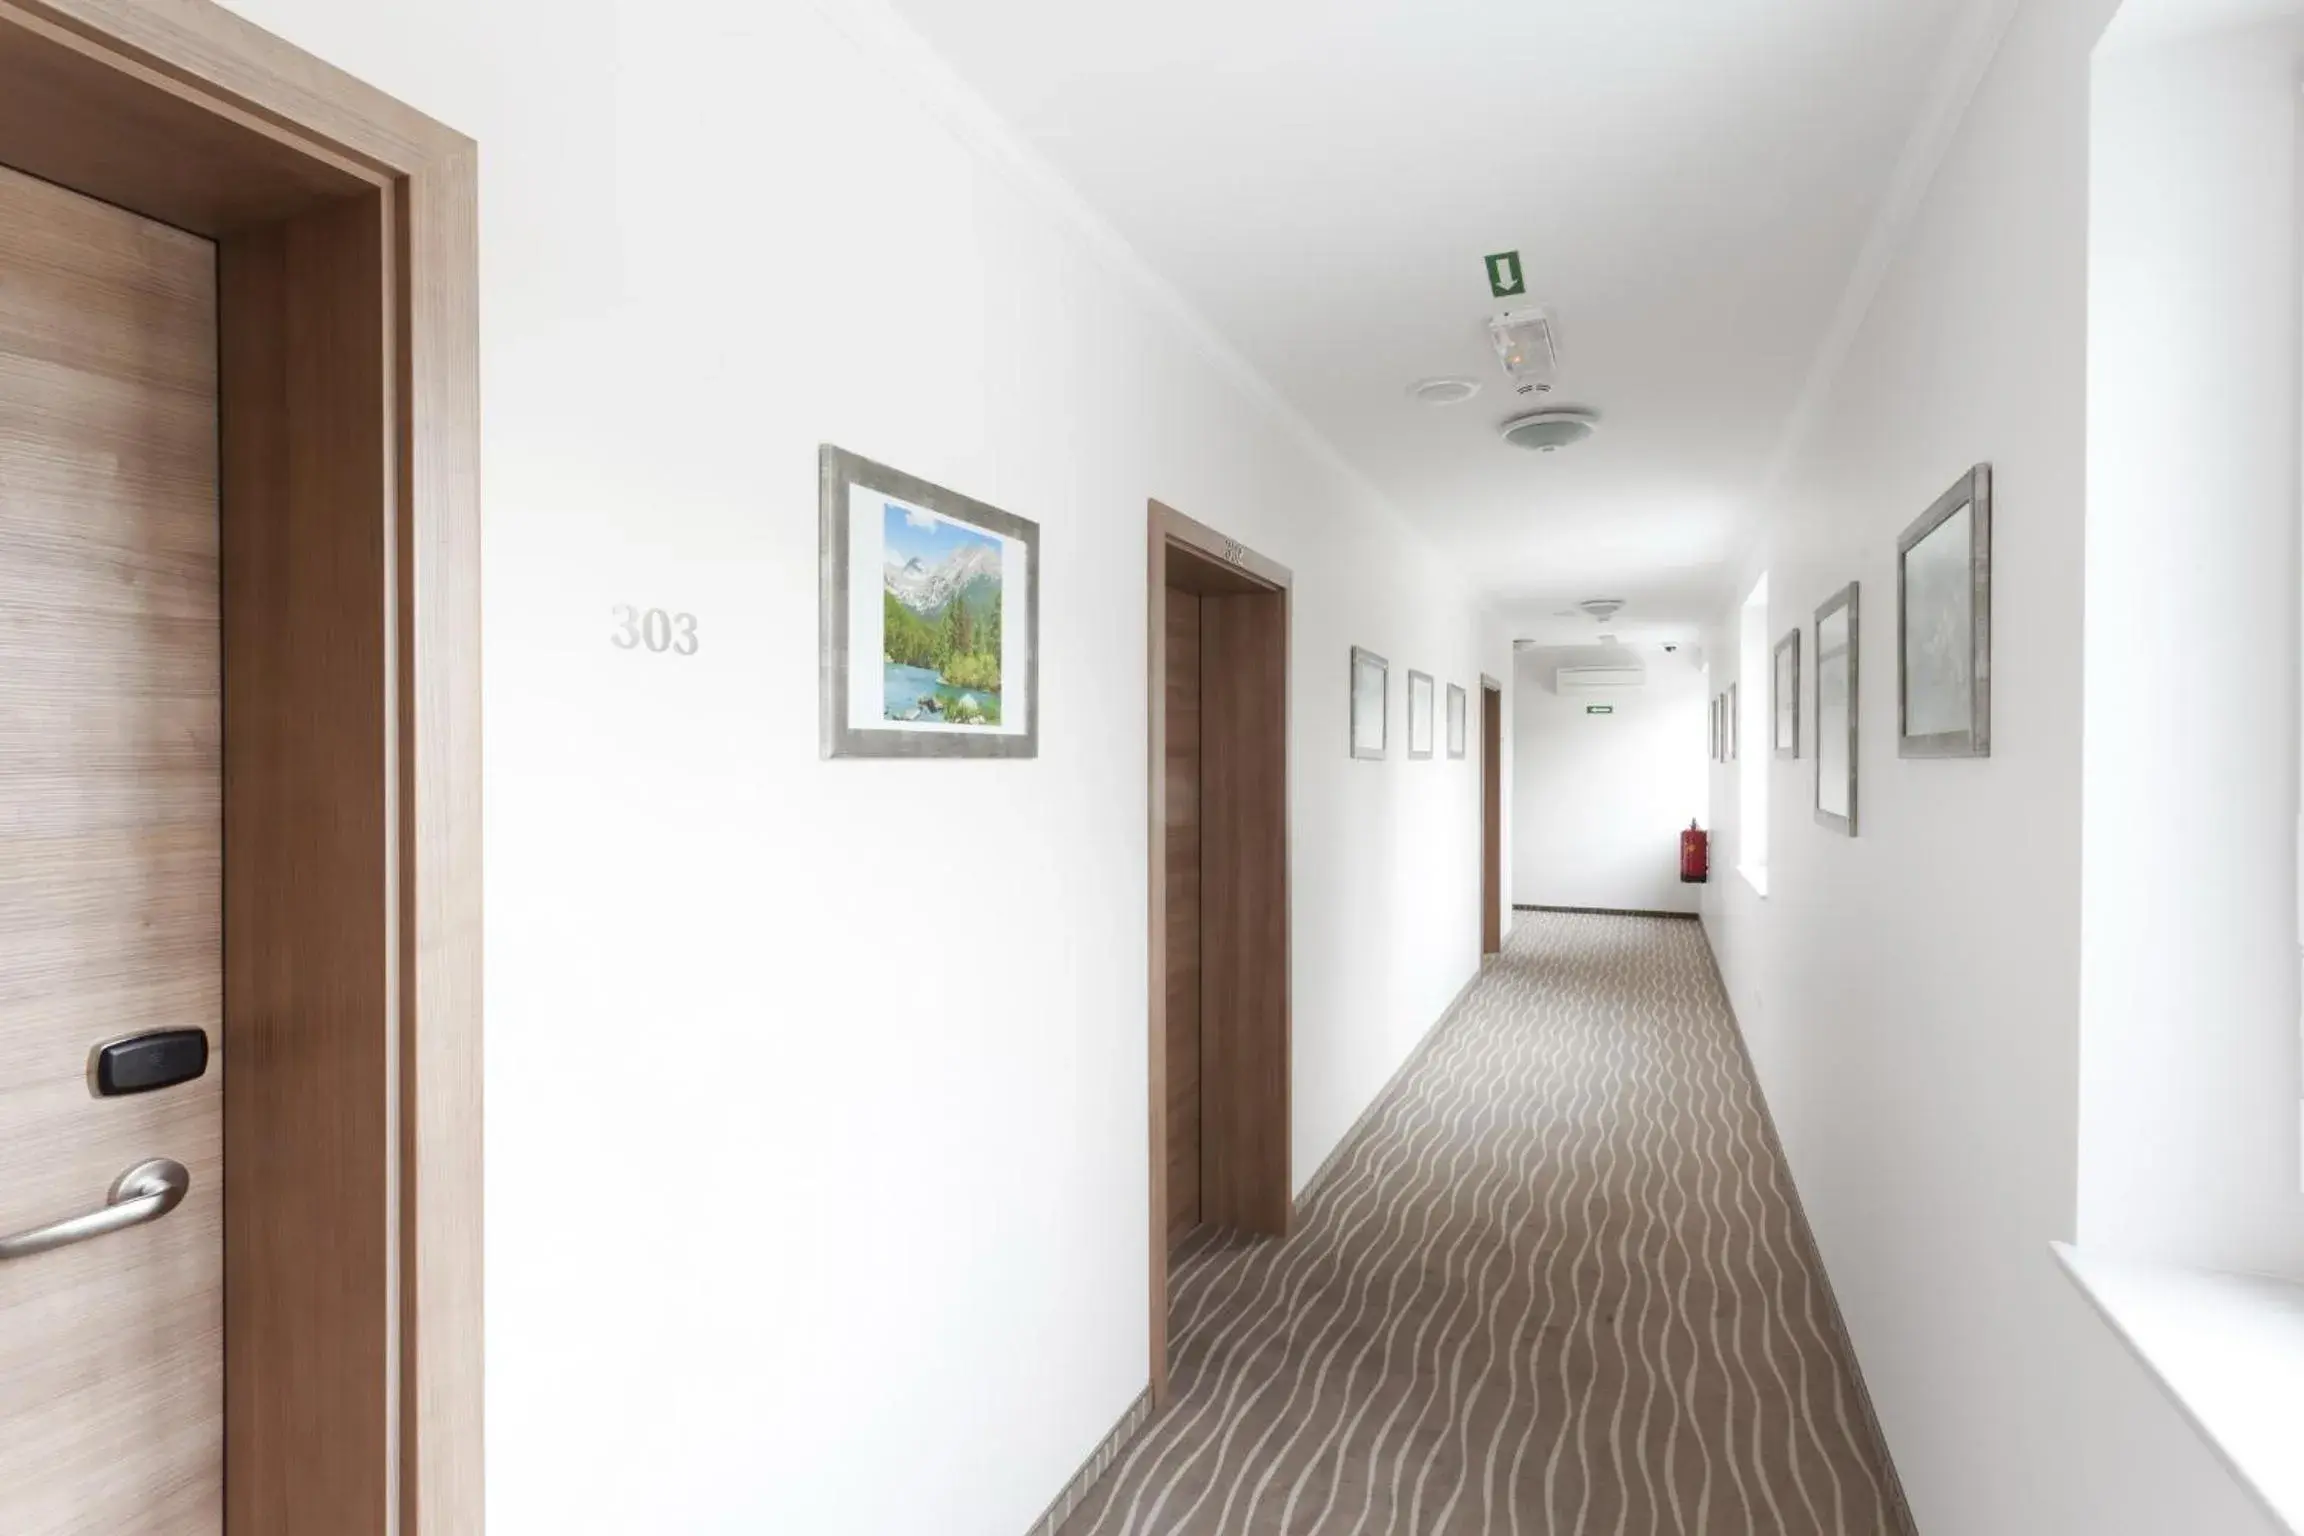 Area and facilities in Primus Hotel & Apartments